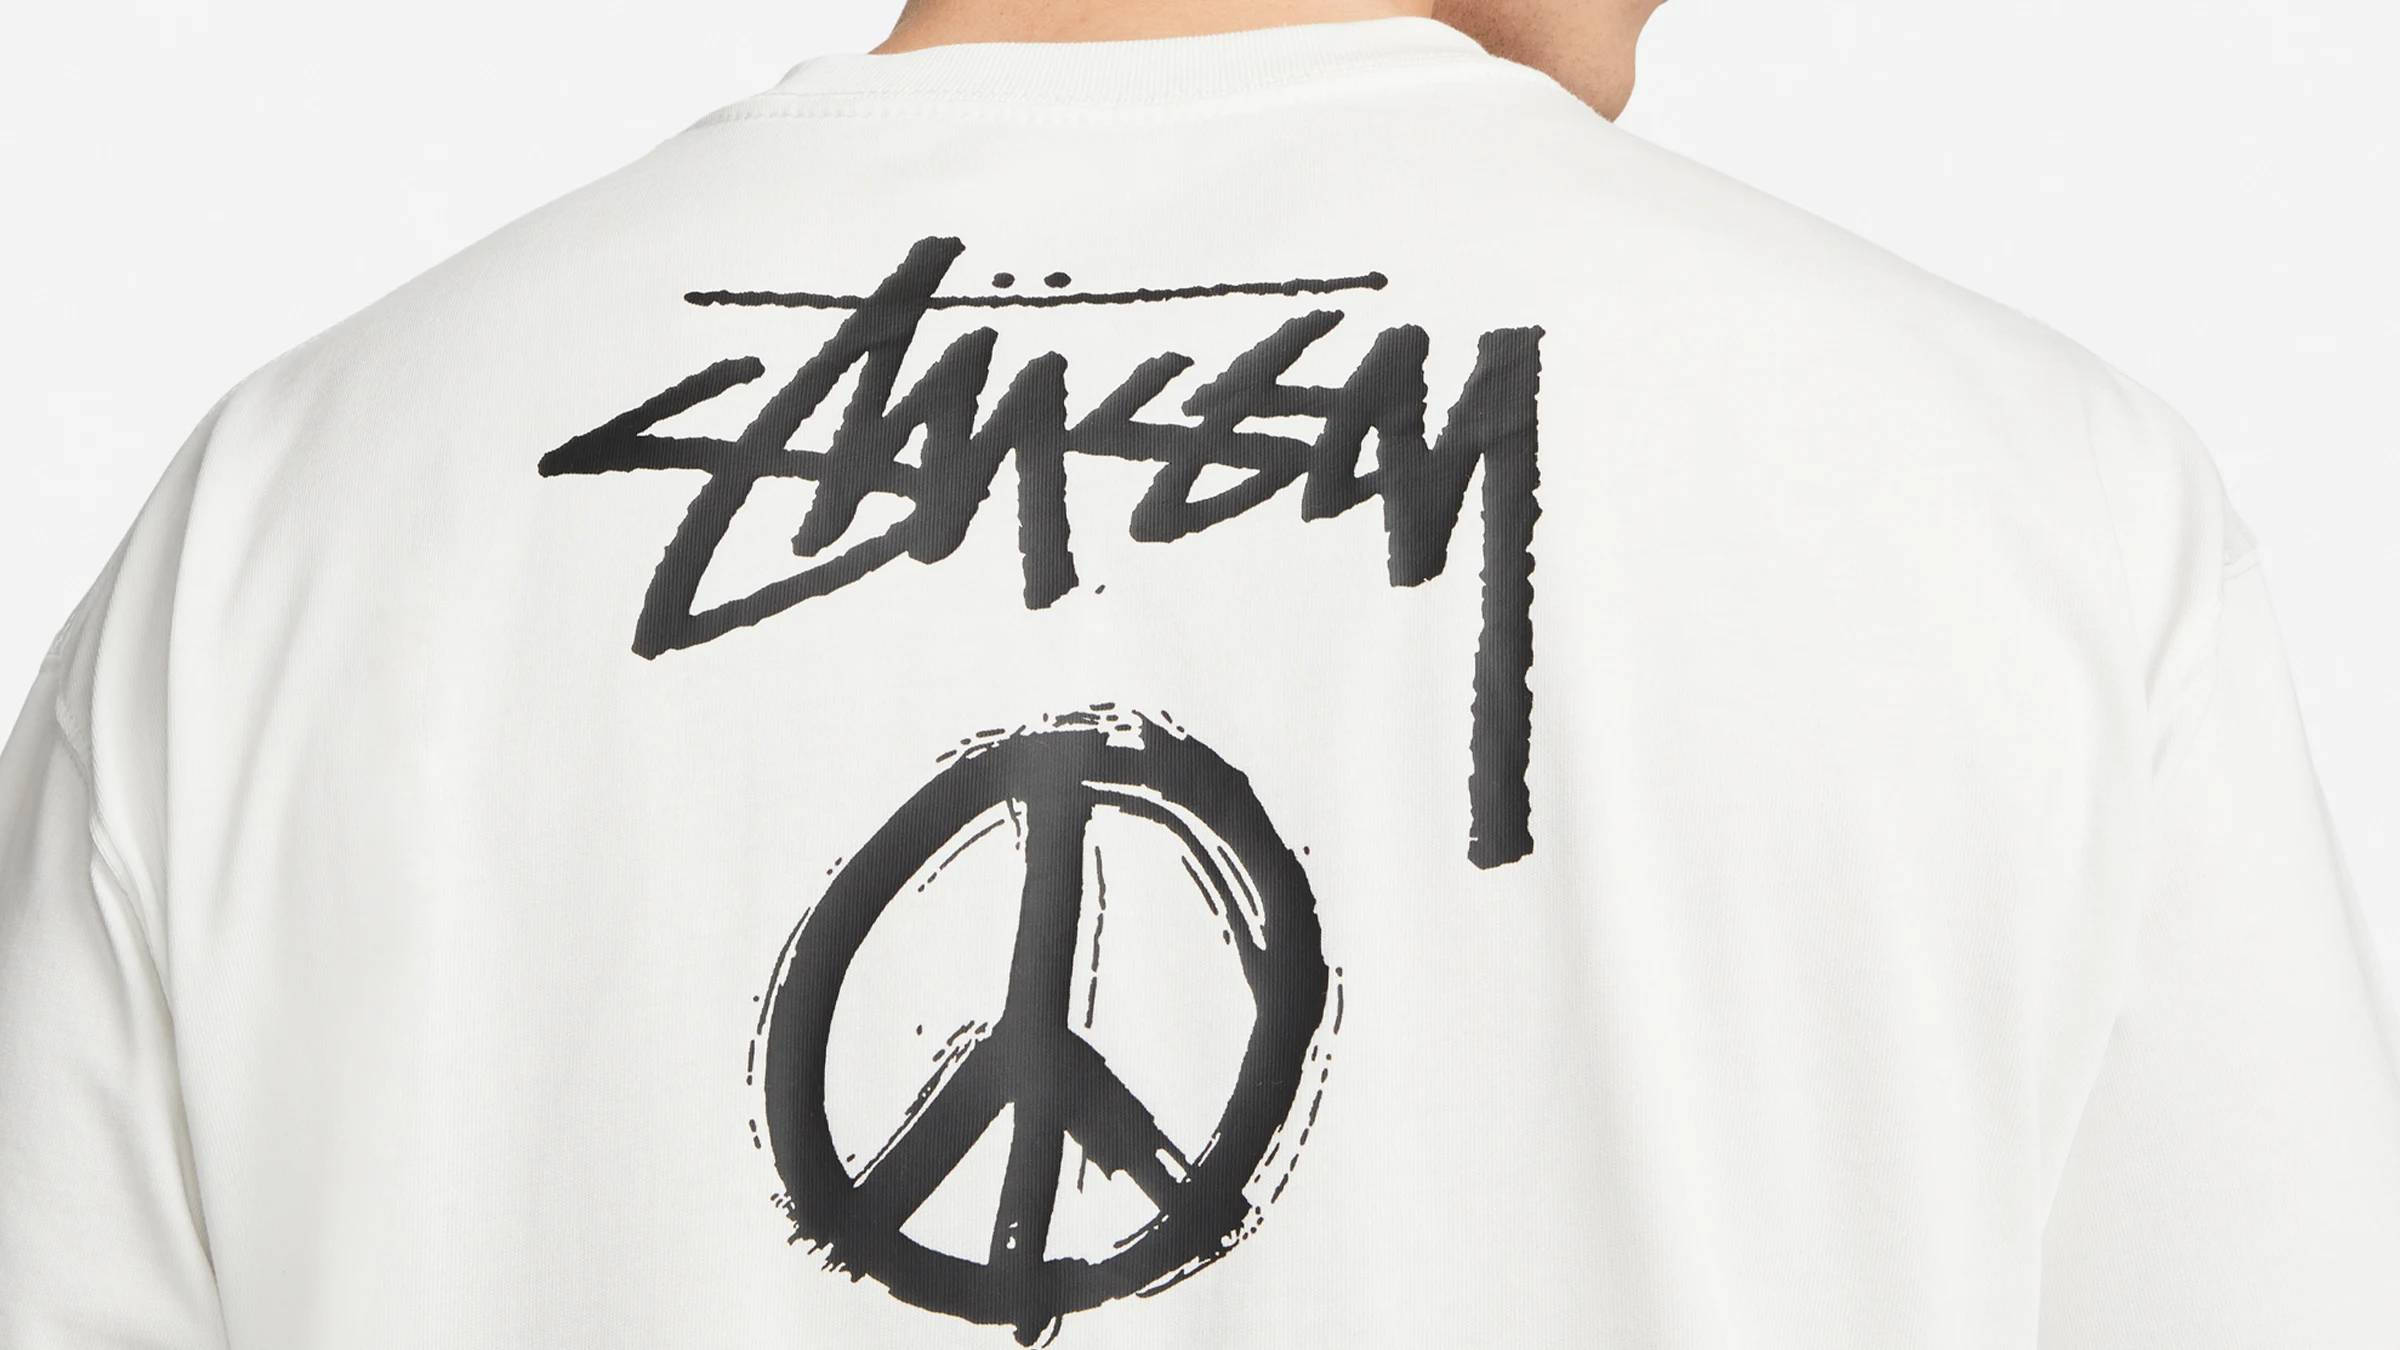 Nike x Stussy Graphics T-Shirt | Where To Buy | DM4942-121 | The 